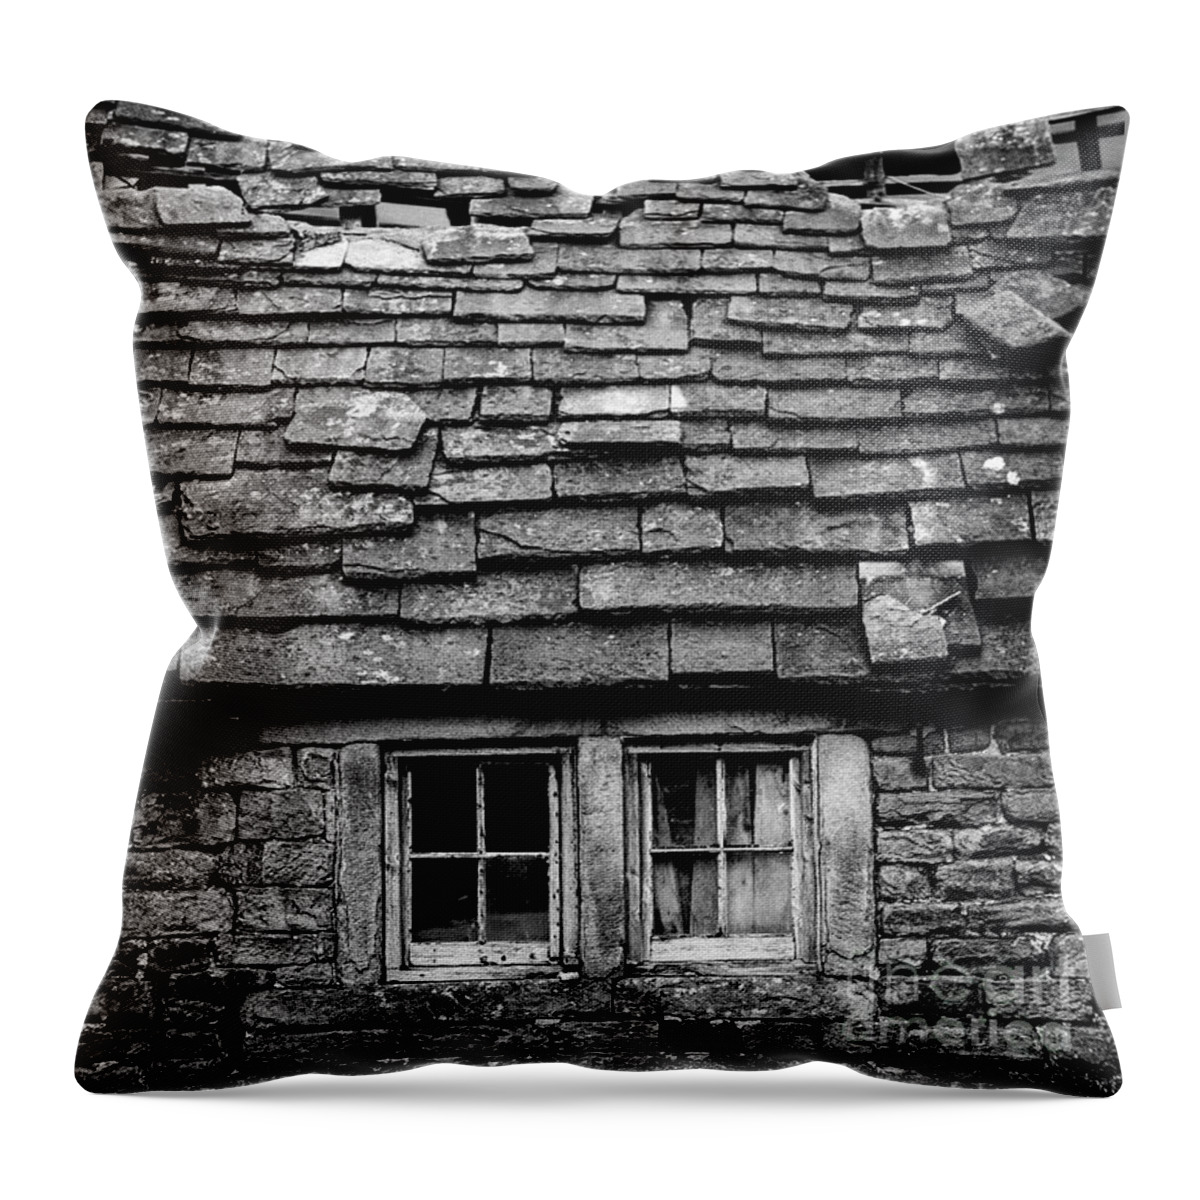 Cottage Throw Pillow featuring the digital art Rustic Cottage by Phil Perkins